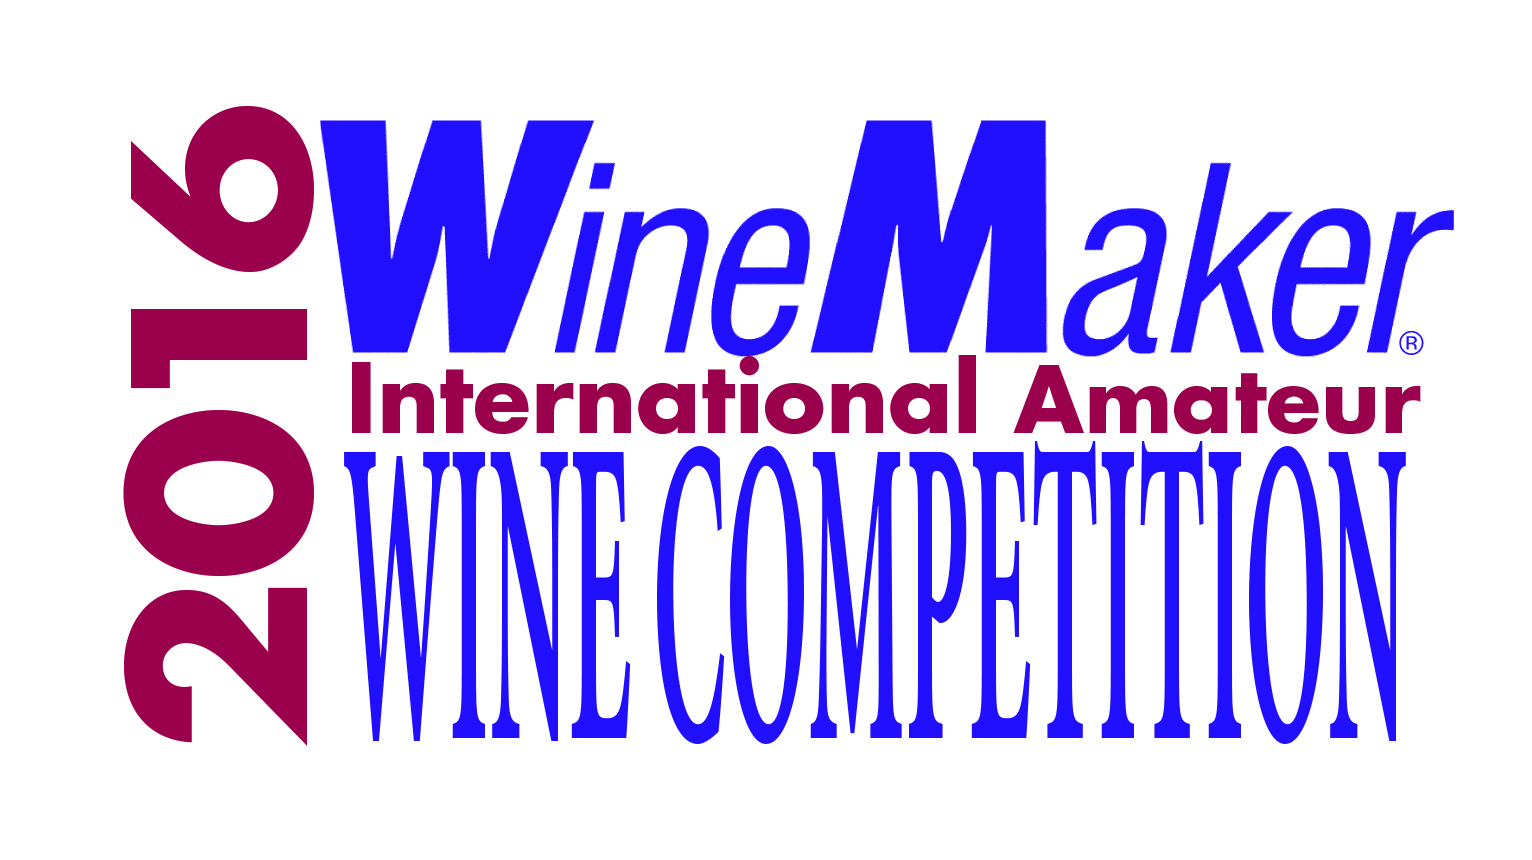 2016 Wine Competition Logo